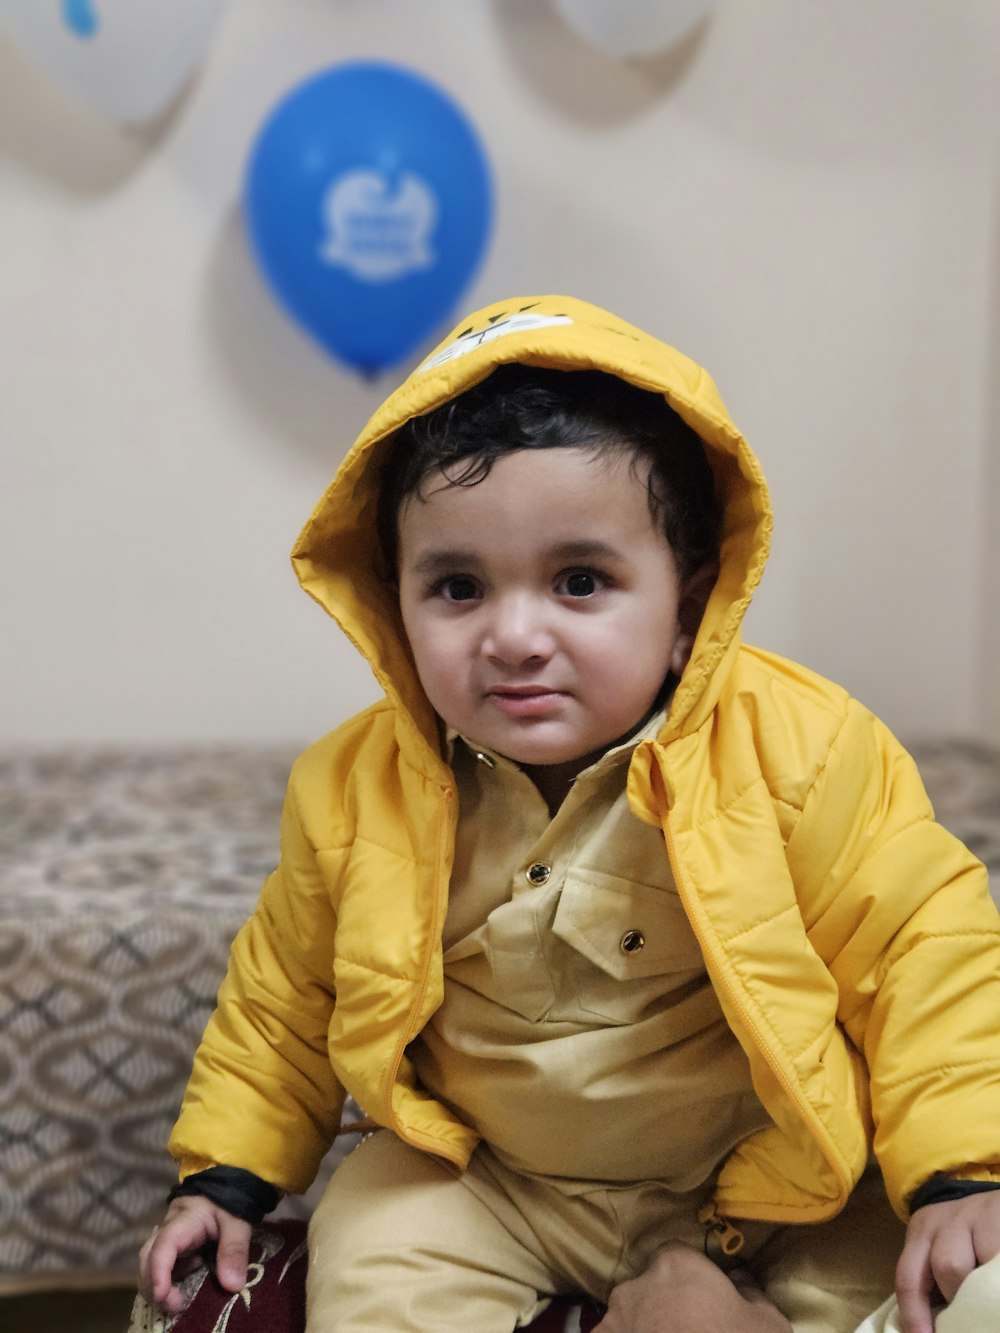 a small child in a yellow jacket sitting on a bed